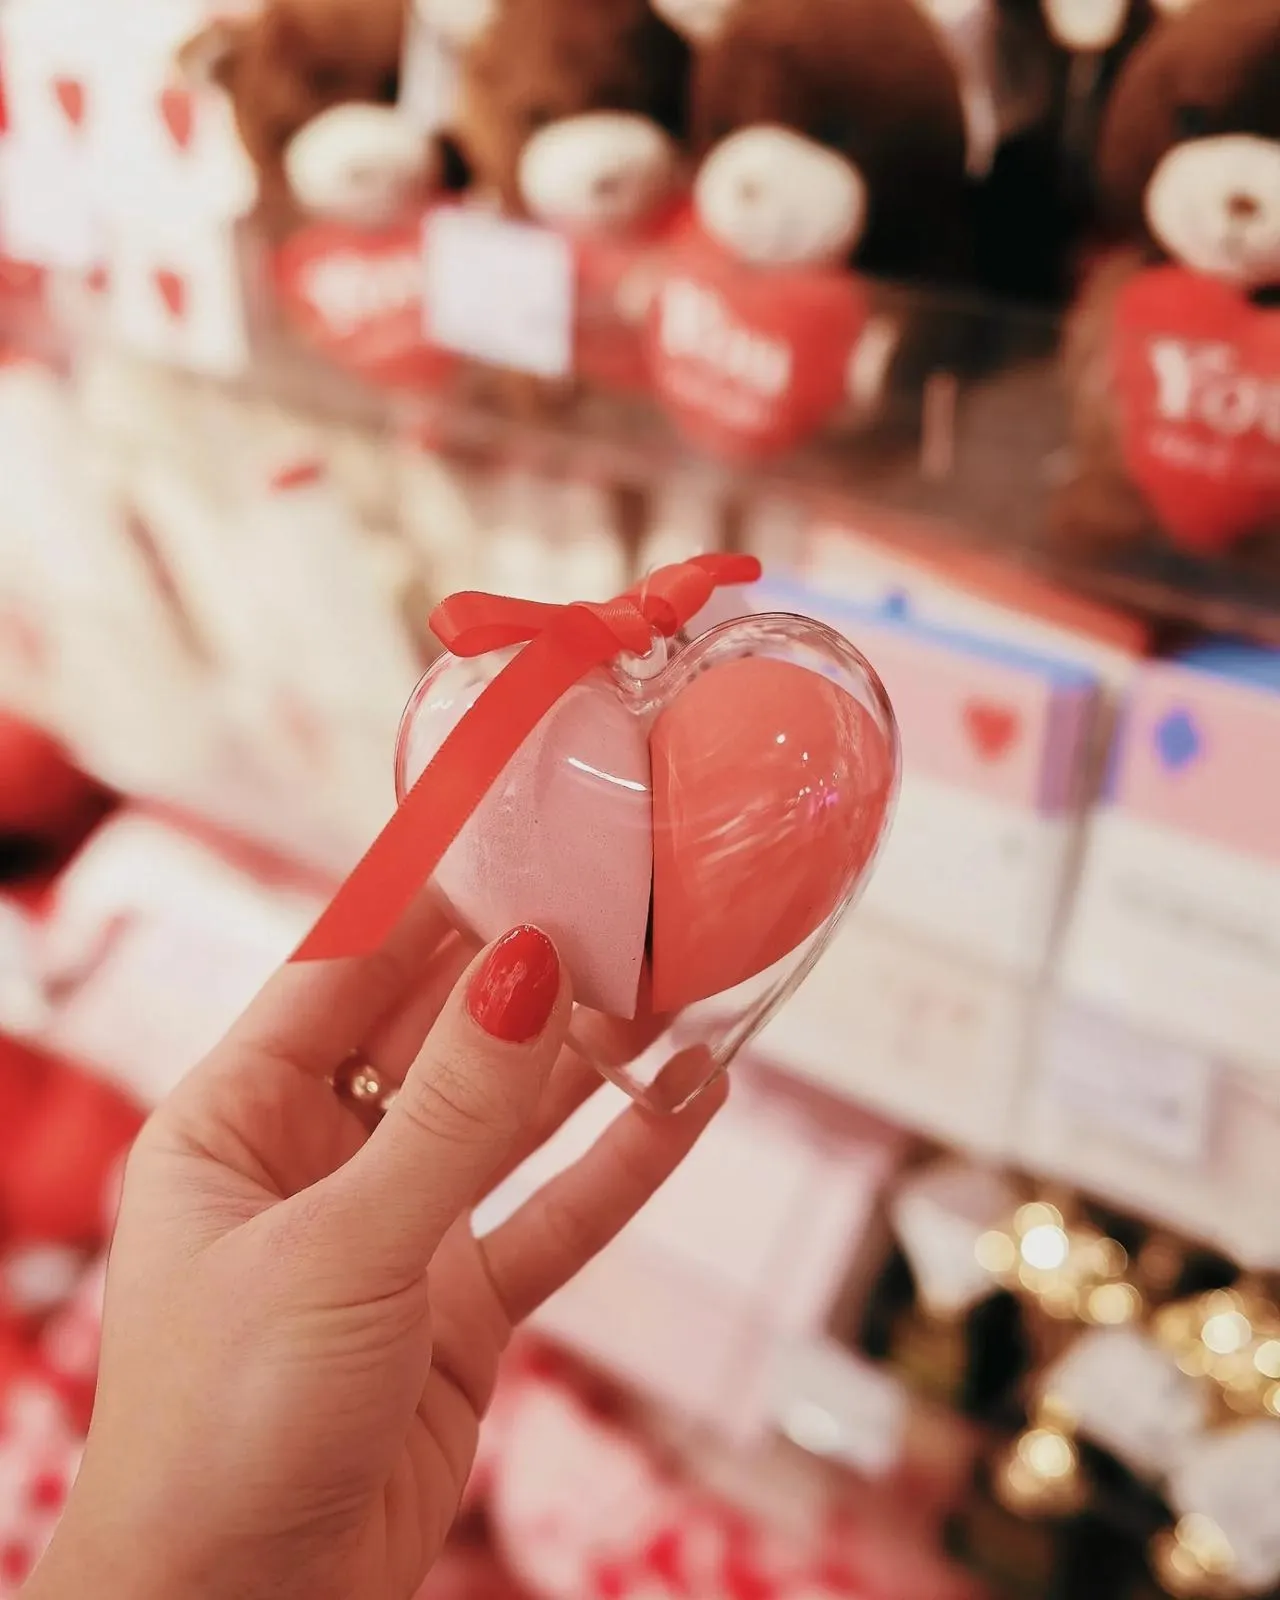 Person holding a heart-shaped box with a red ribbon